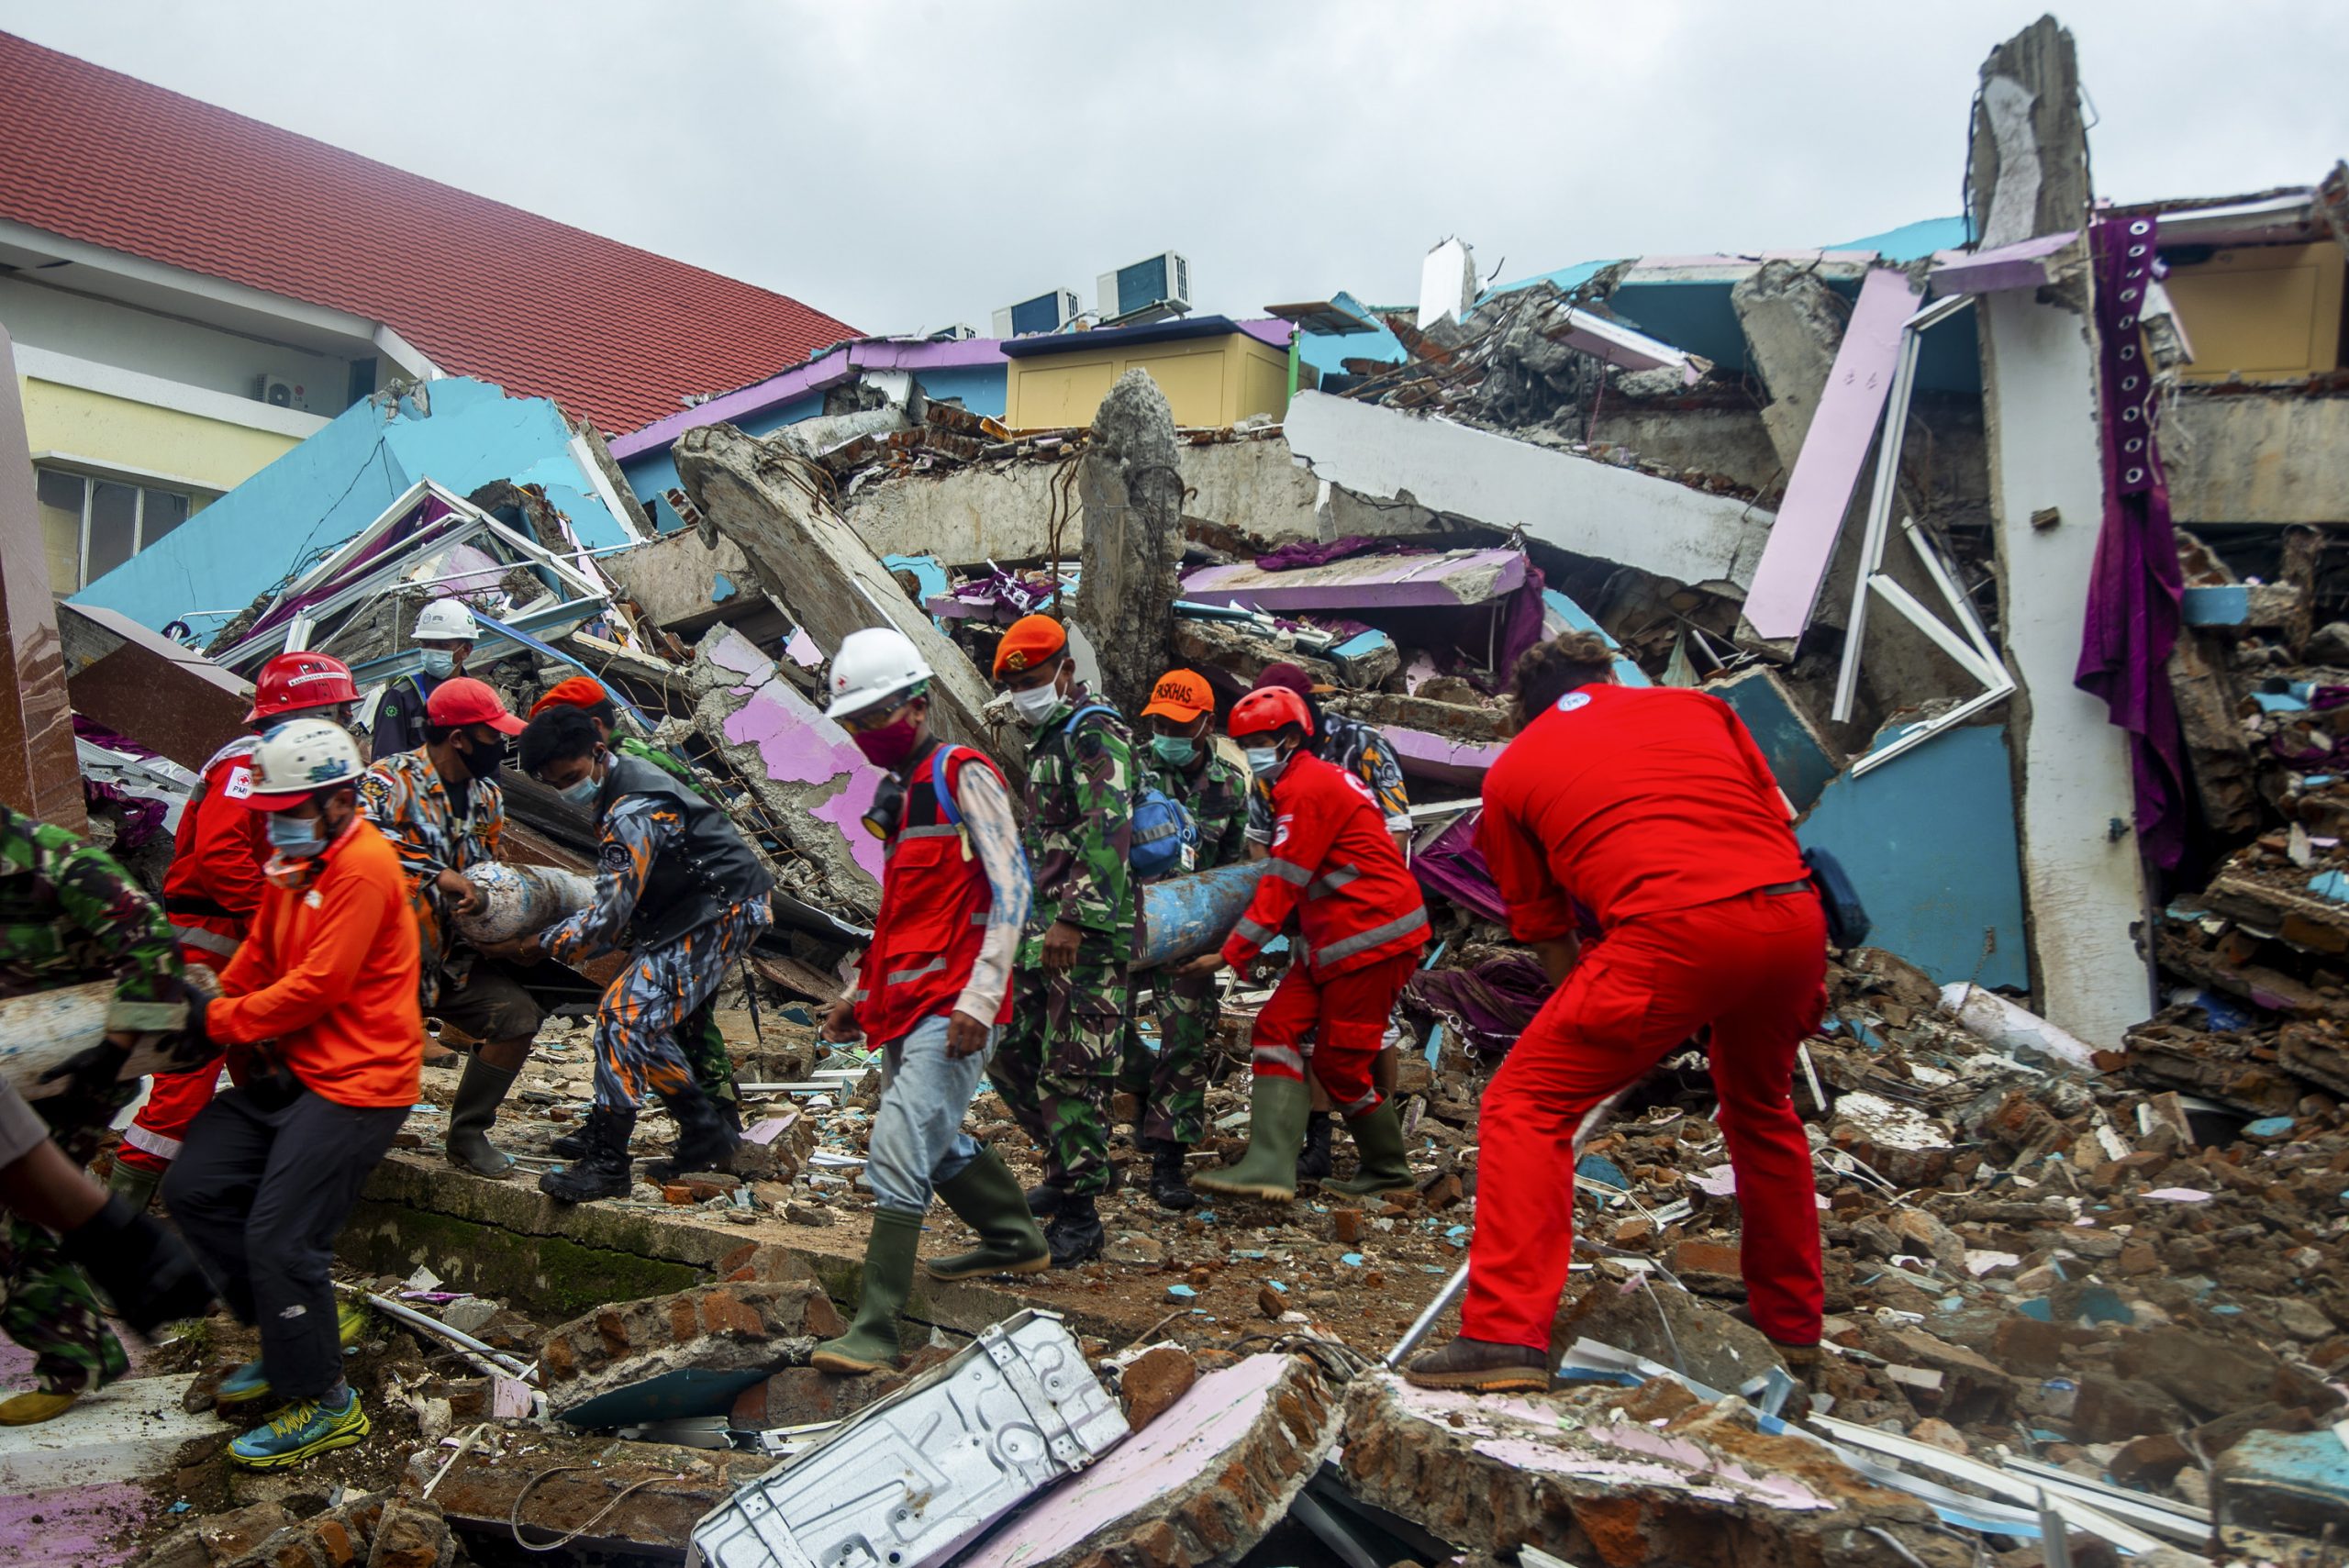 epa08943004 Rescuers and volunteers carry tubes out of the ruin of a collapsed building hit by the 6.2 magnitude earthquake in Mamuju, West Sulawesi, Indonesia, 17 January 2021. At least 56 people died and hundreds were injured after a 6.2 earthquake struck Sulawesi island on 15 January.  EPA/IQBAL LUBIS